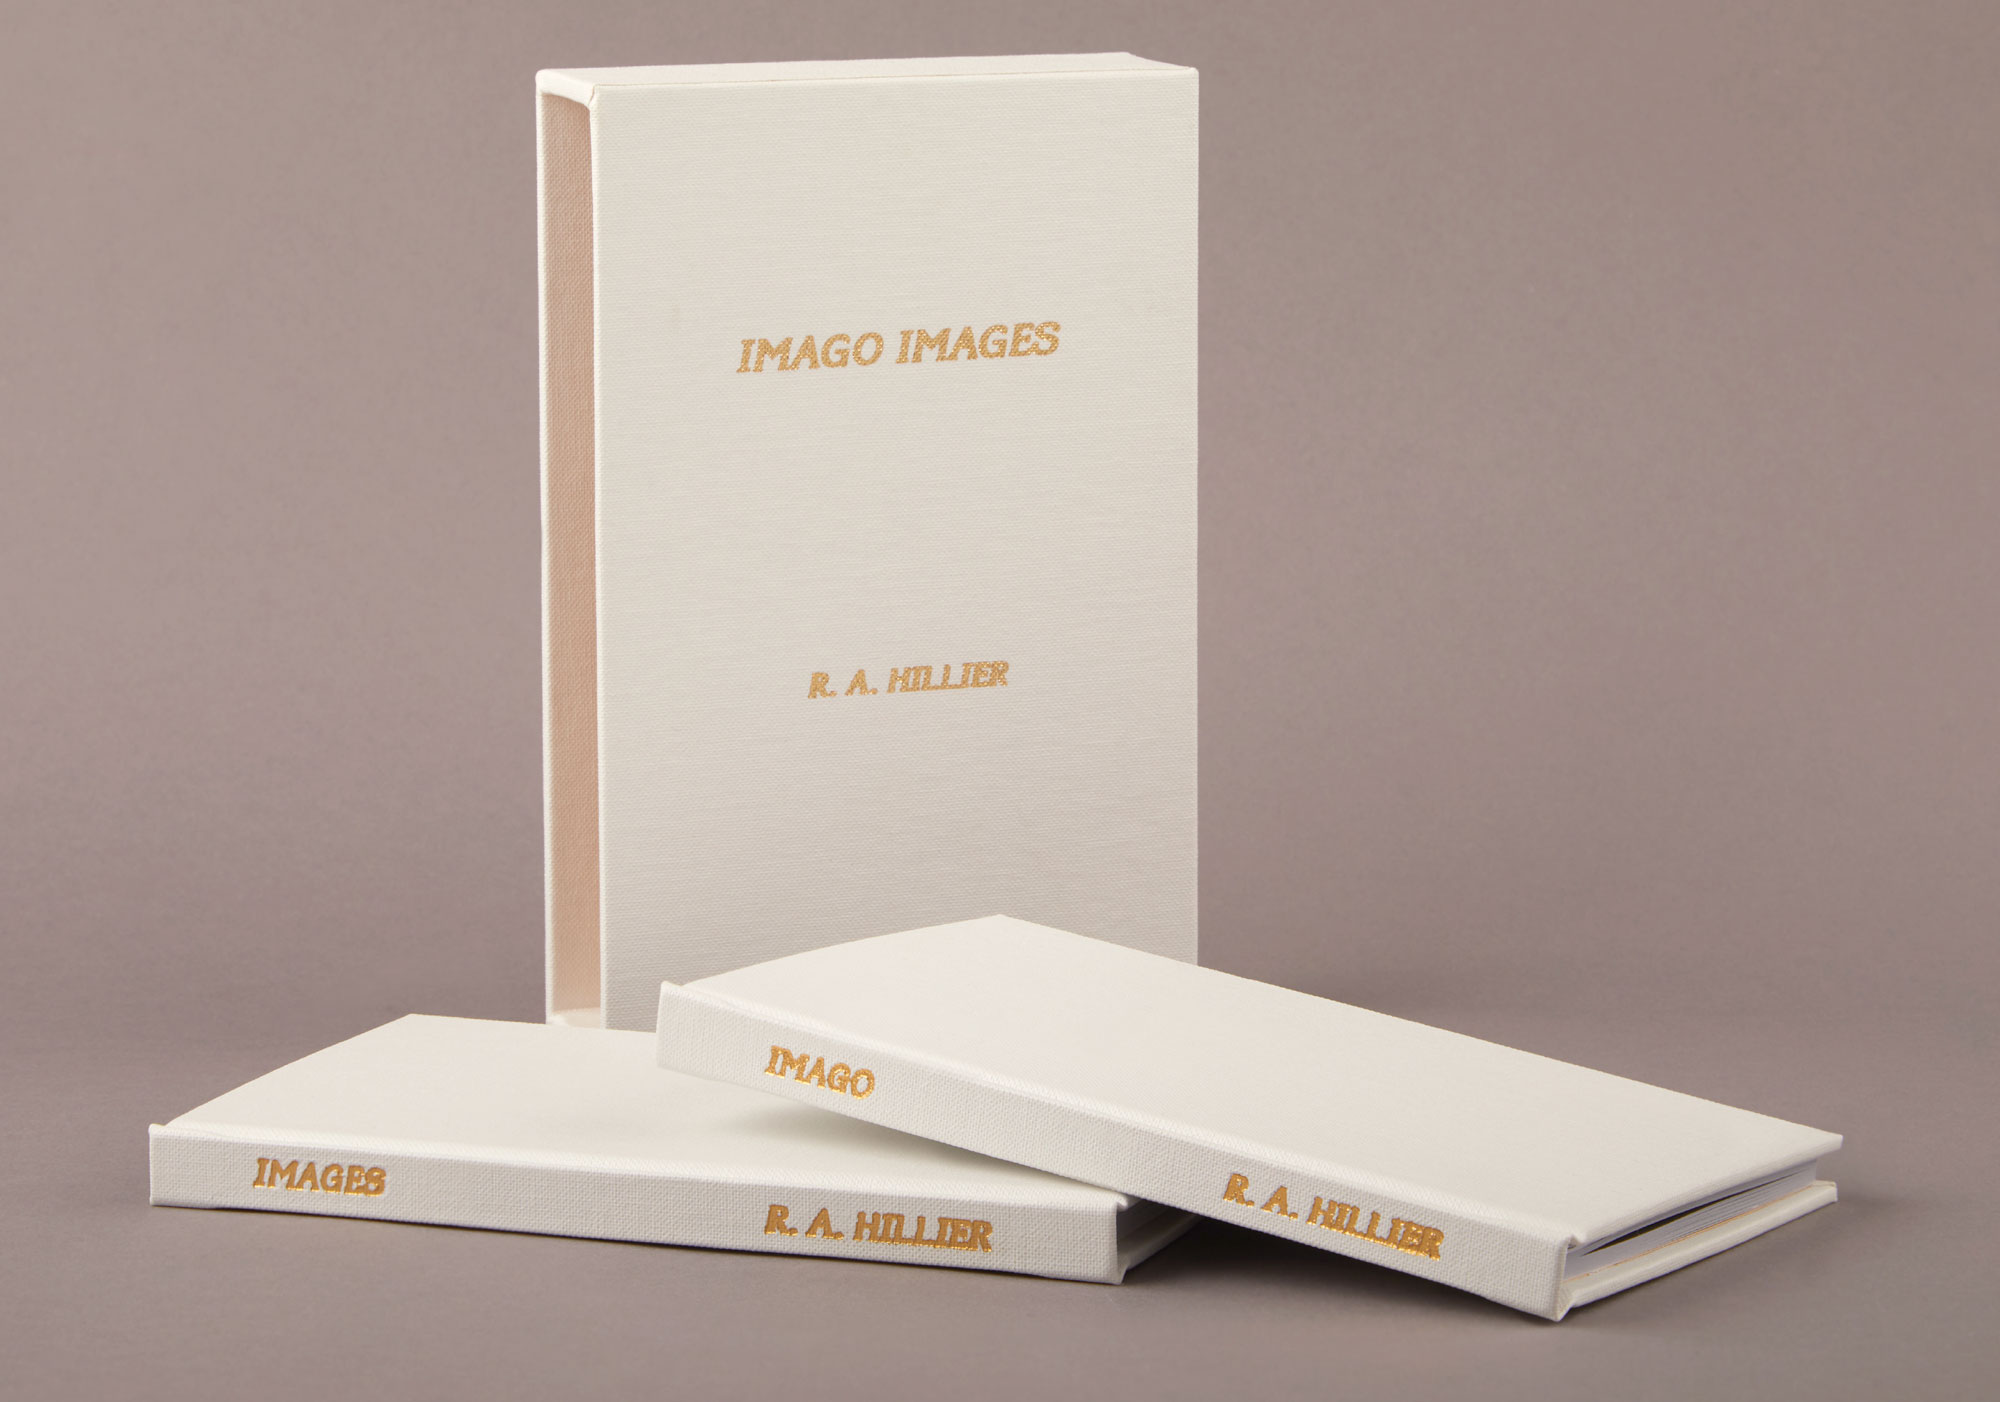 Photograph of the book standing up from front on, shows a white cover and gold foiled text on the cover saying ‘Imago Images’. Then it has 2 more copies of the book in front flat